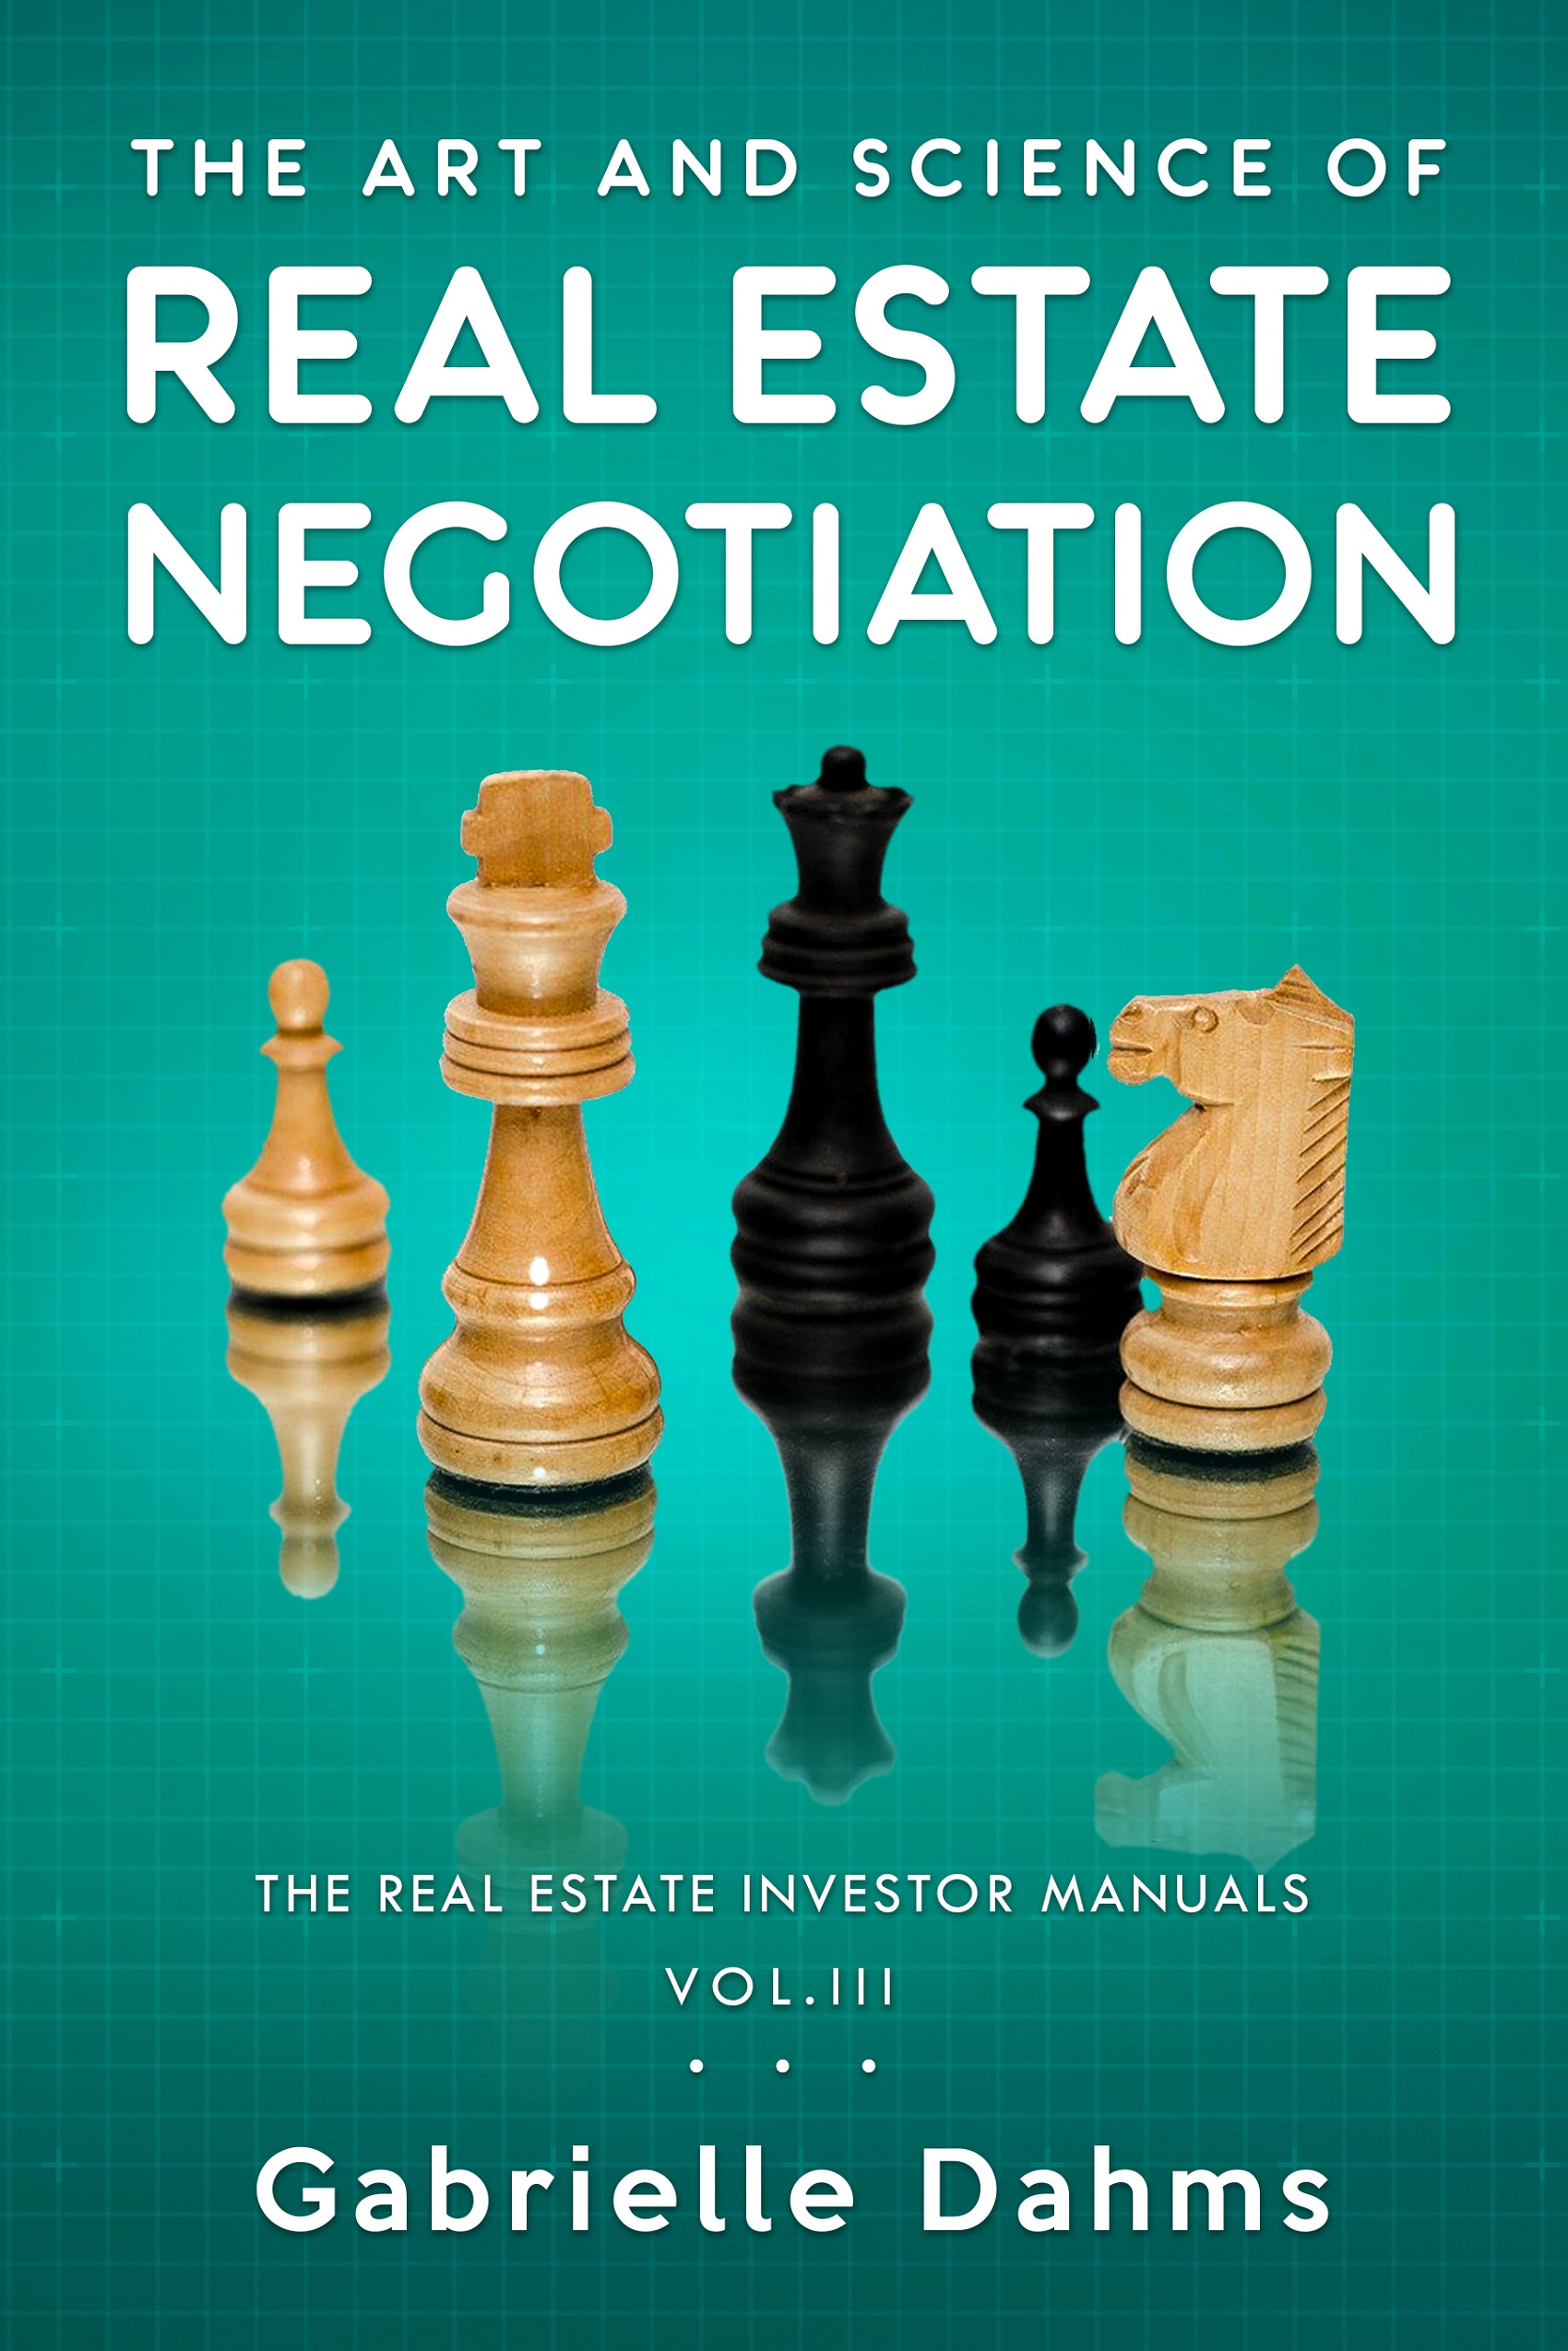 The Art and Science of Real Estate Negotiation by Gabrielle Dahms